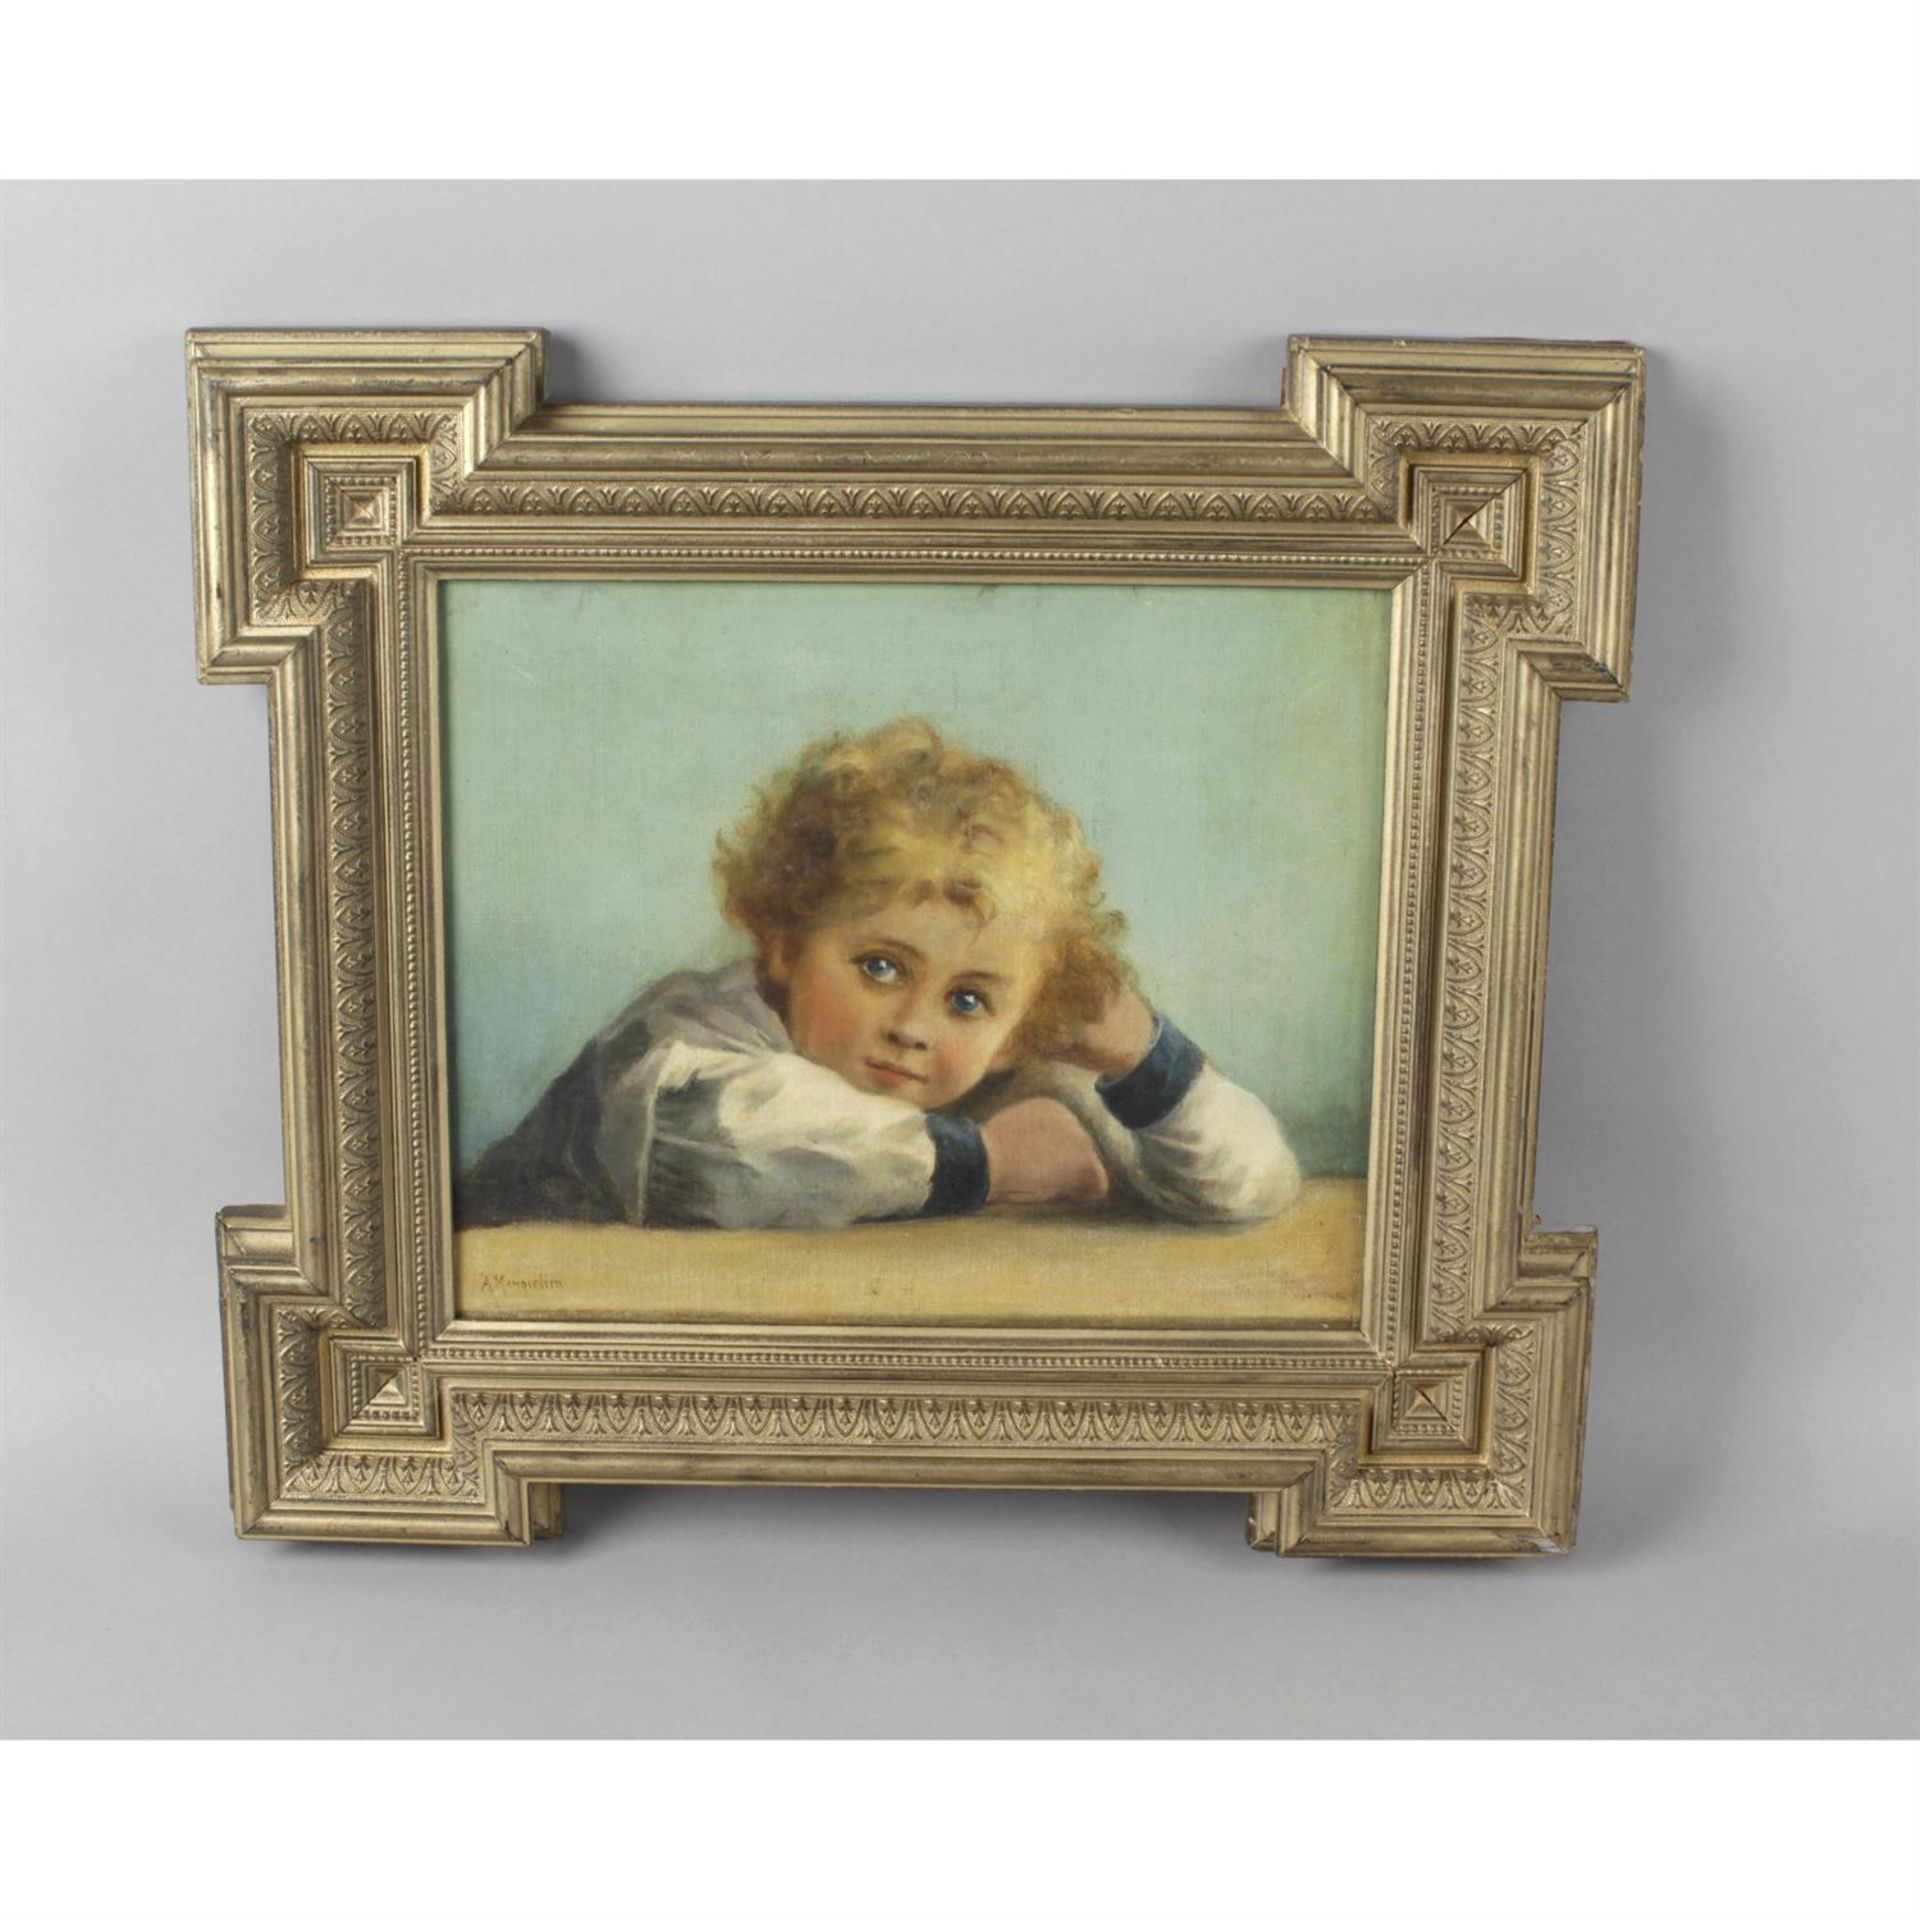 A. Mangredien (19th century), oil painting on canvas, signed portrait of a young child - Image 2 of 2